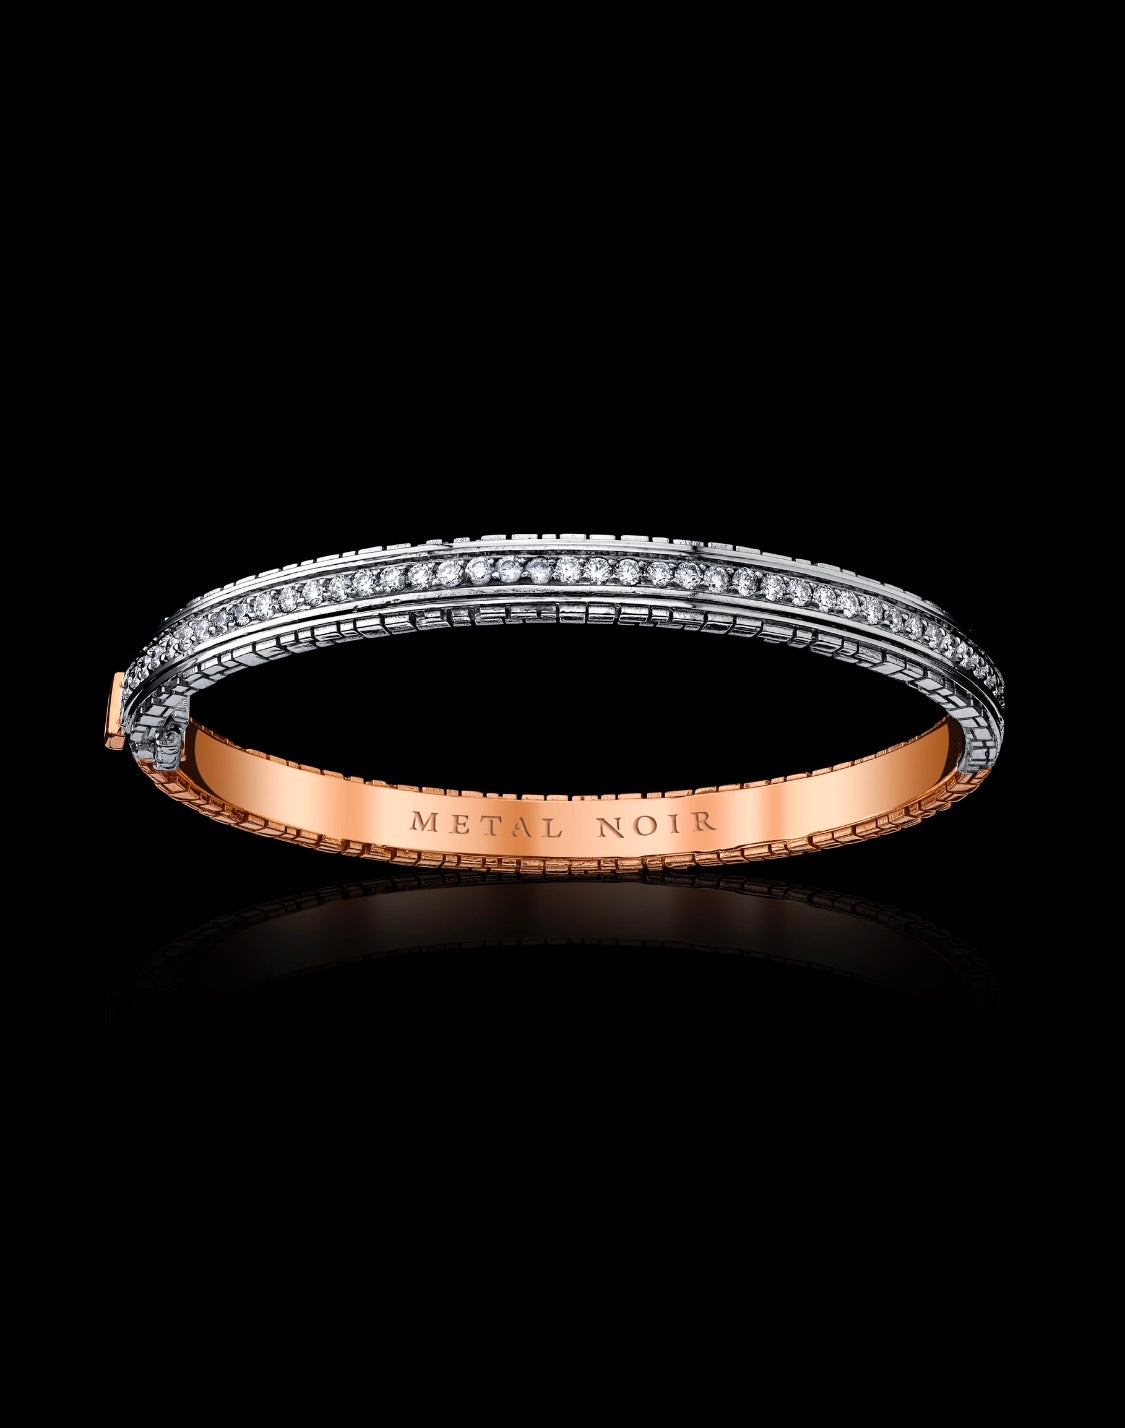 Signature Collection Two-Tone Eternity Bracelet with 20 Point Natural multi-color Sapphires and Diamonds